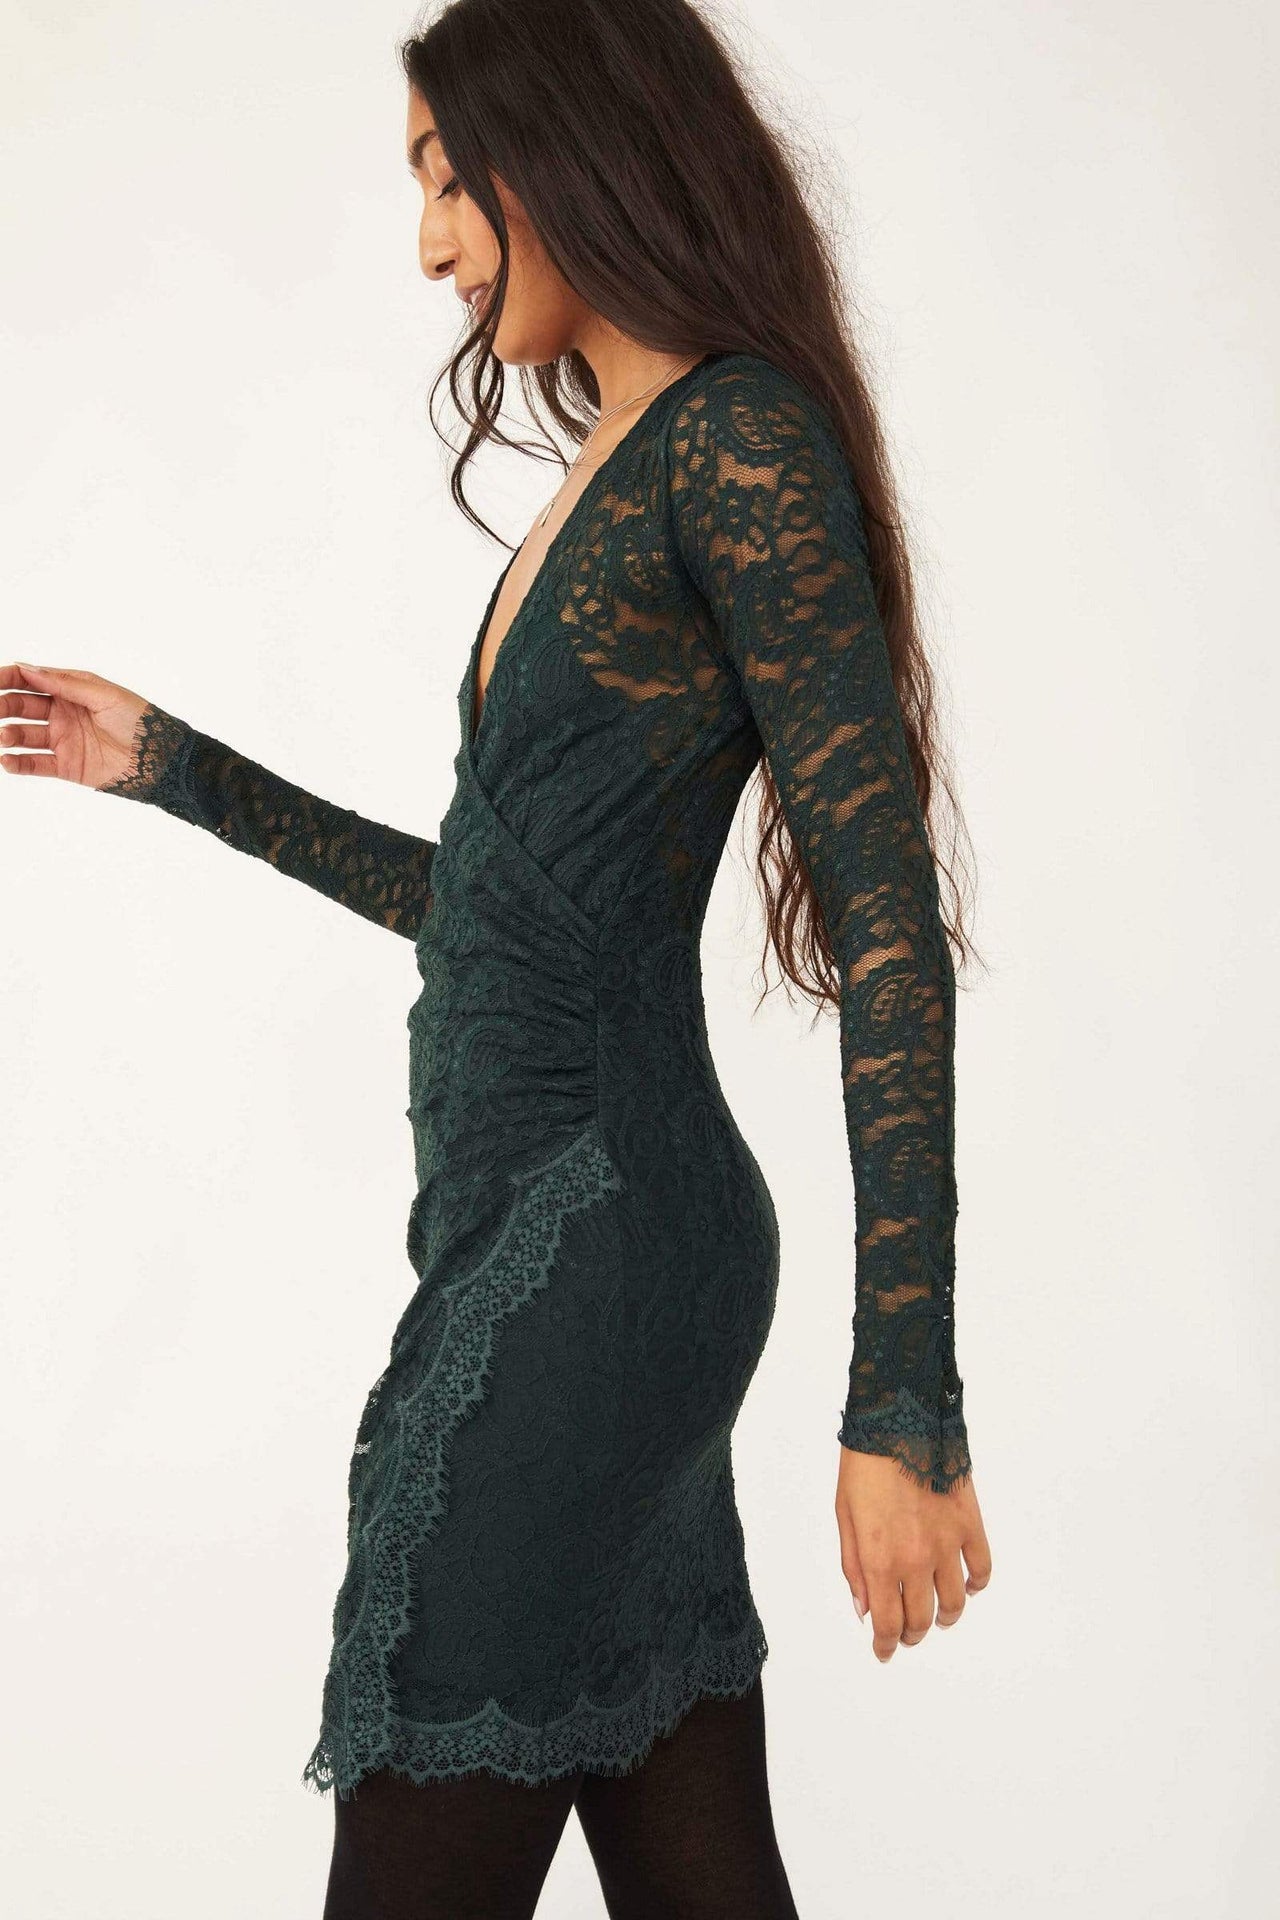 Pearl Lace Mini Dress Deepest Spruce, Mini Dress by Free People | LIT Boutique